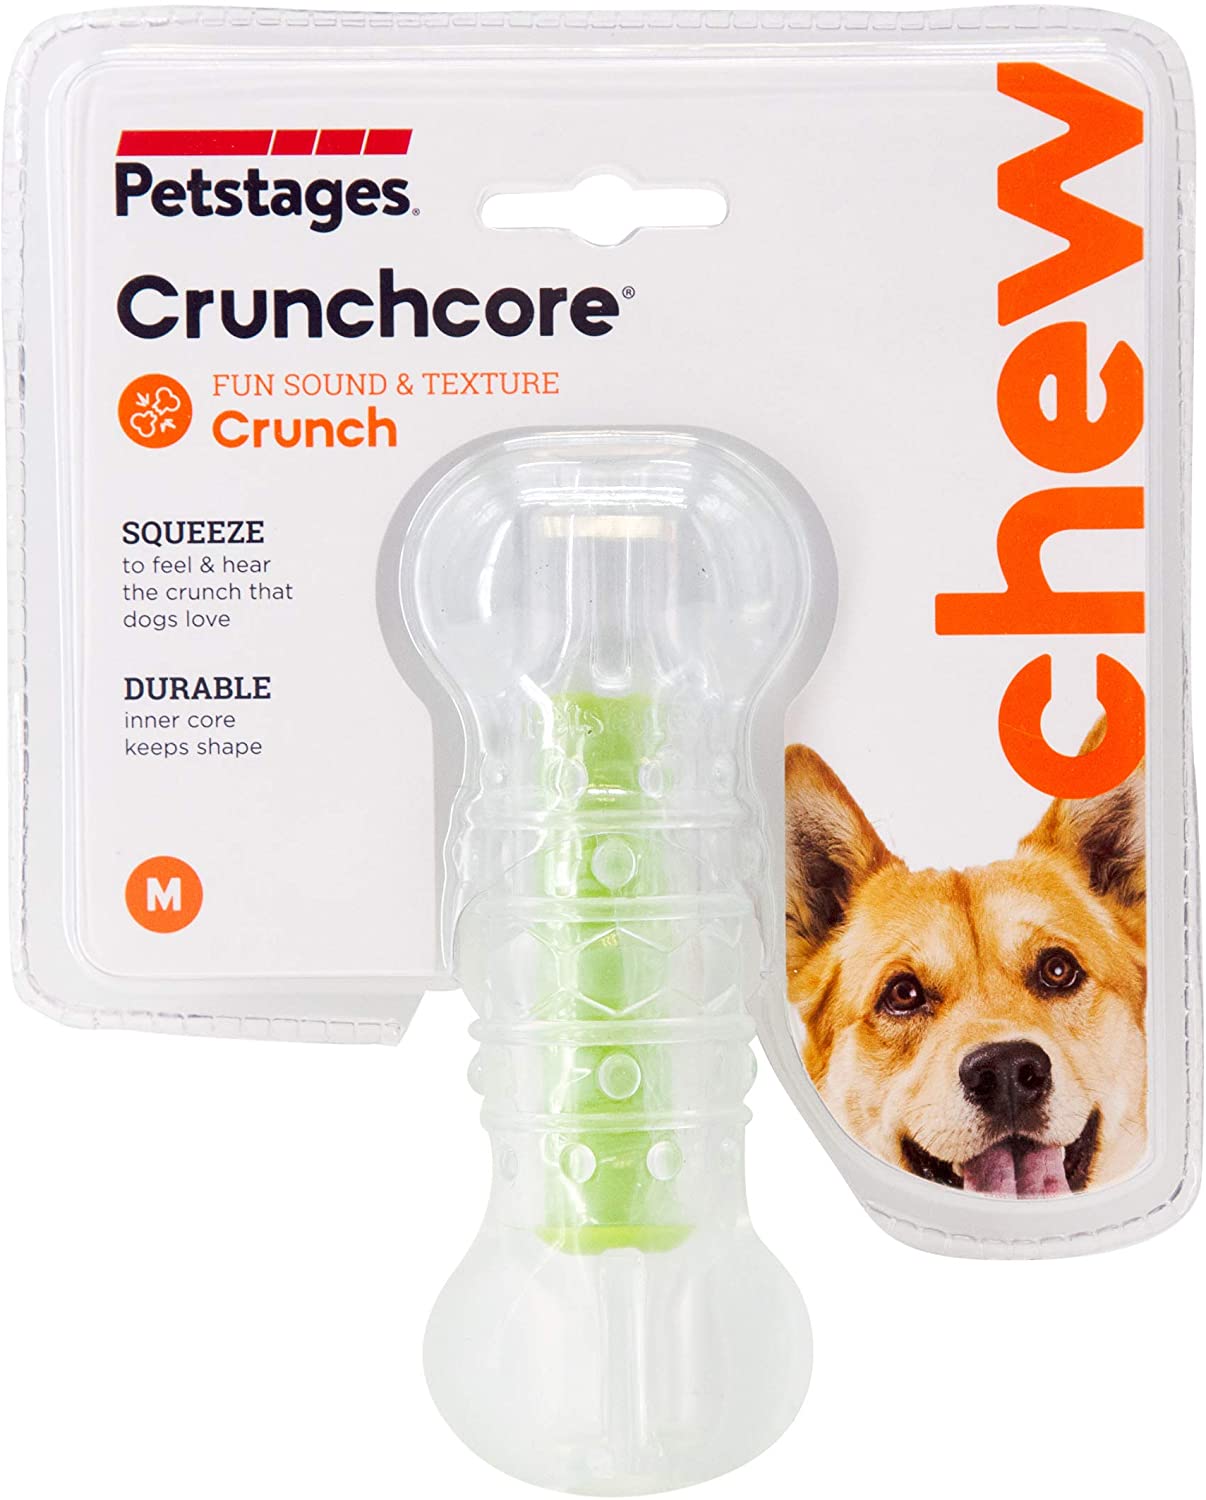 Crunchcore by Petstages